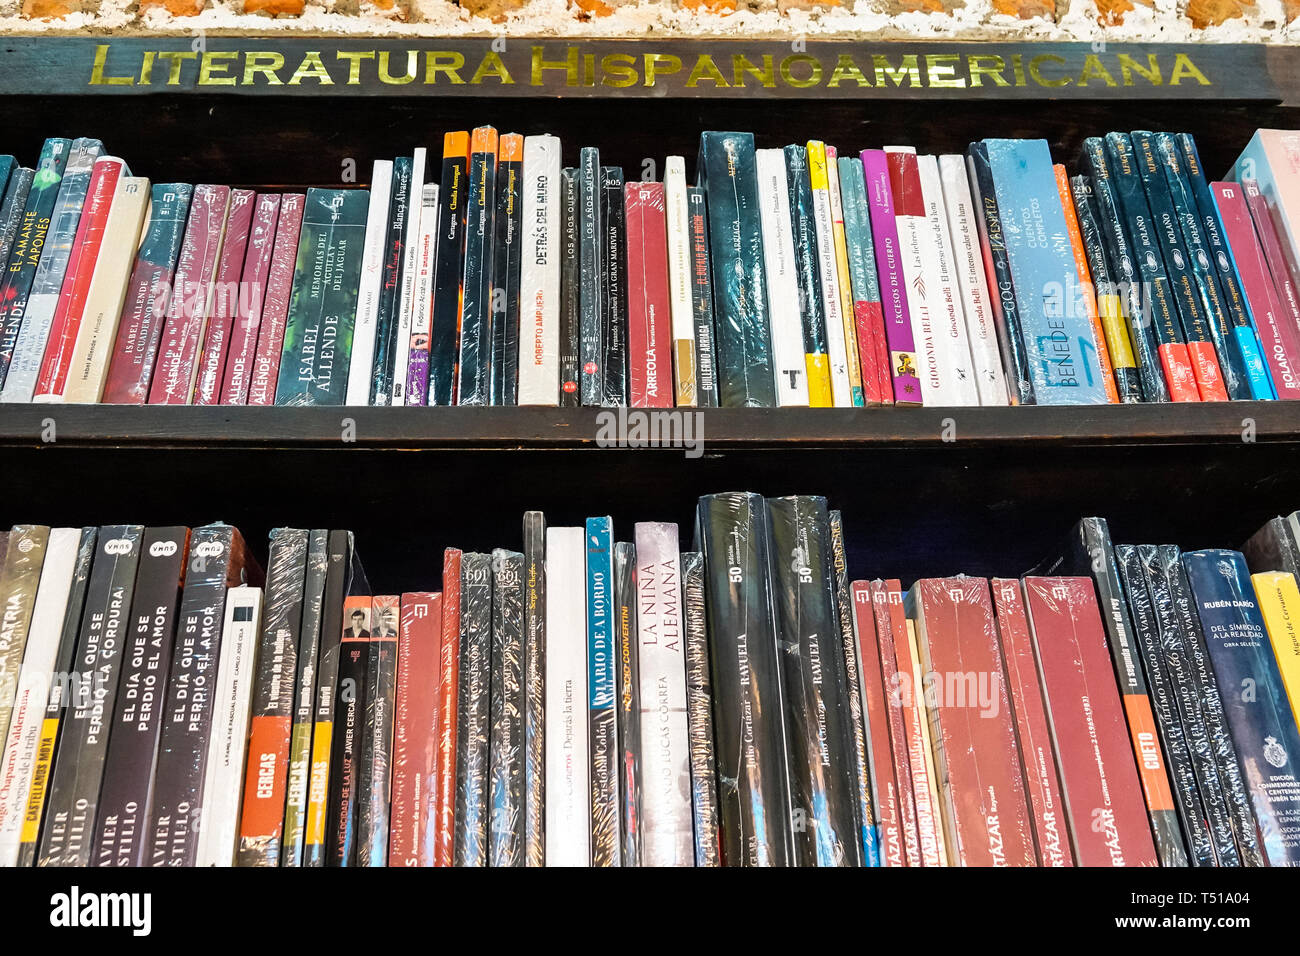 Cartagena Colombia,Abaco Libros y Cafe,Abacus bookstore cafe,interior inside,bookshelf,Latin American literature,books,COL190123064 Stock Photo